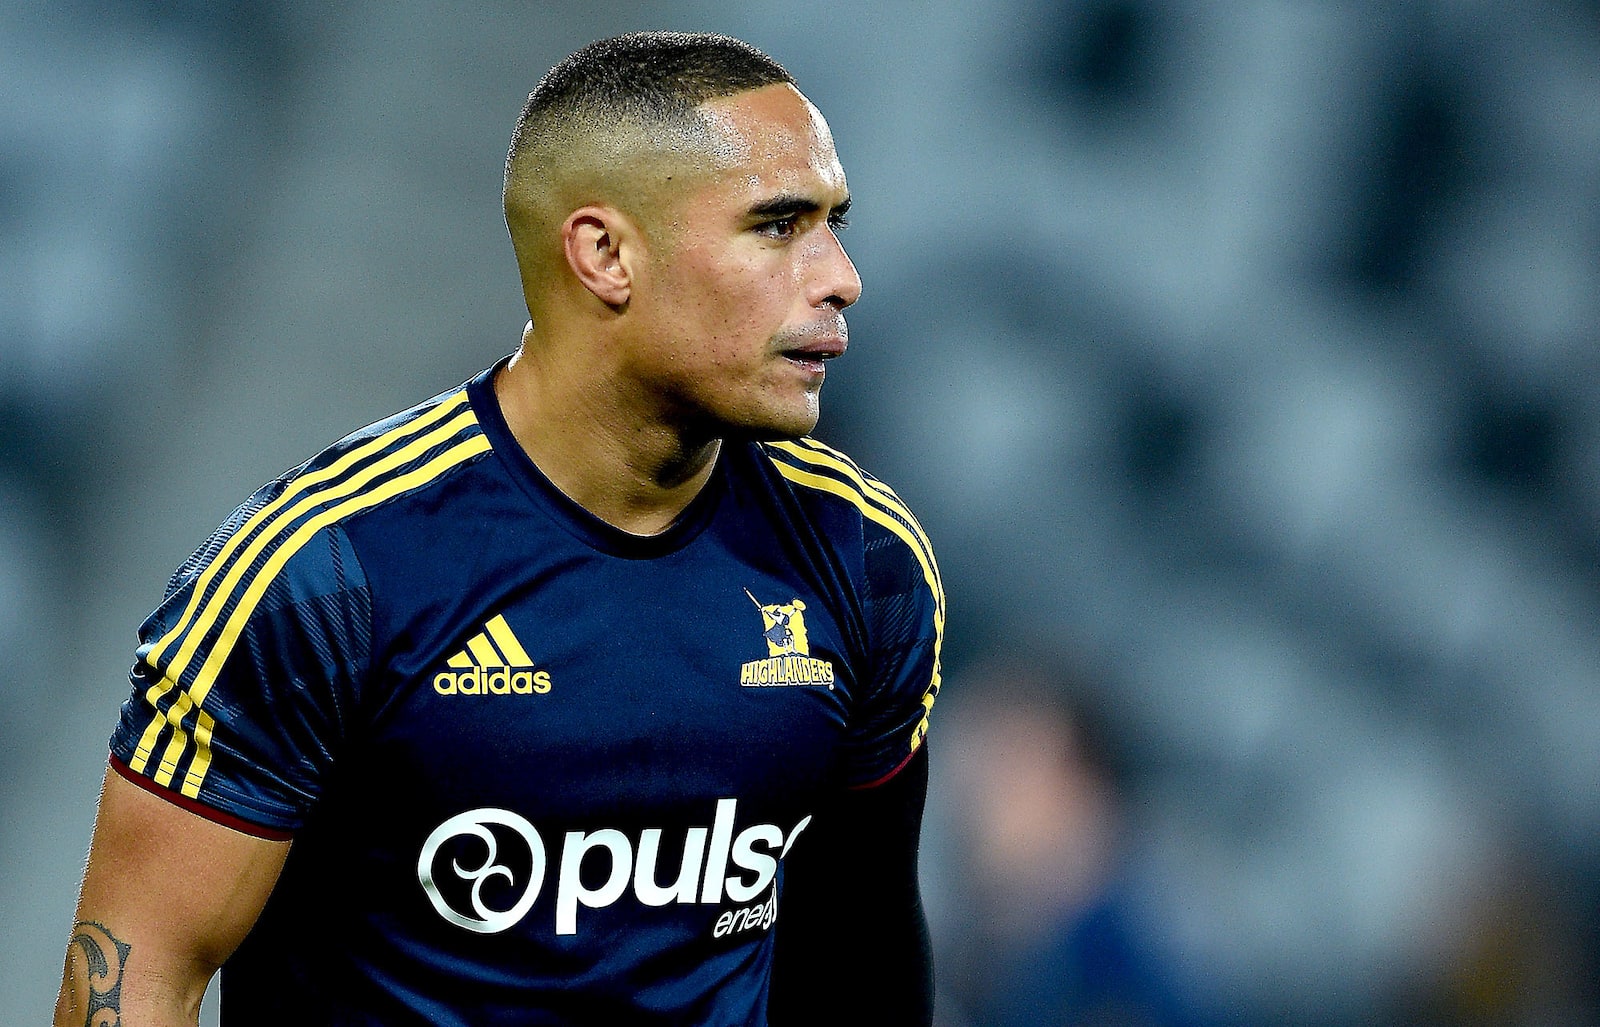 Aaron Smith of the Highlanders looks on prior to a Super Rugby match.